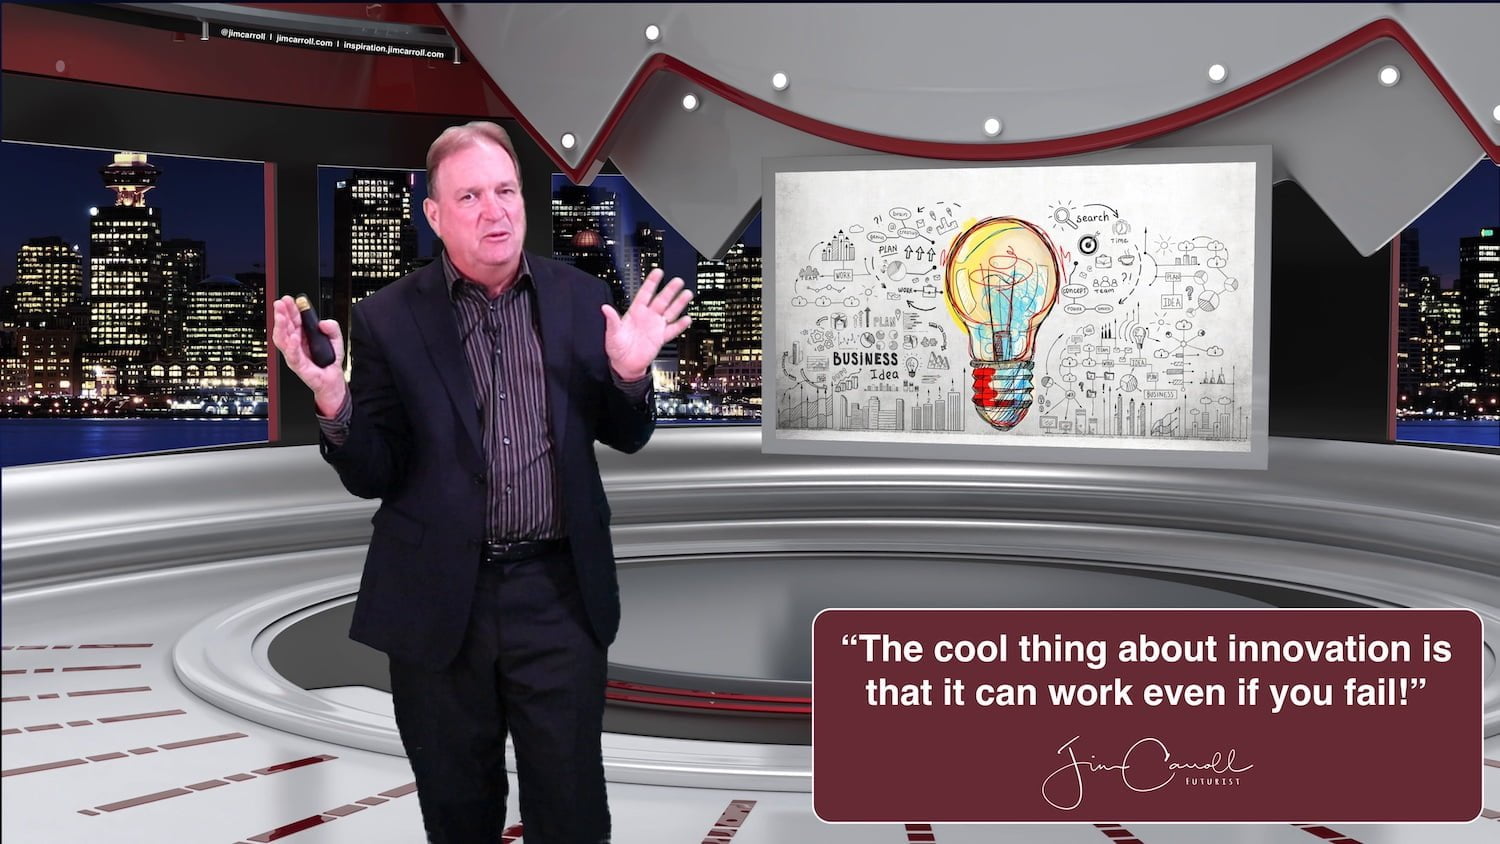 Daily Inspiration: “The cool thing about innovation is that it can work even if you fail!”